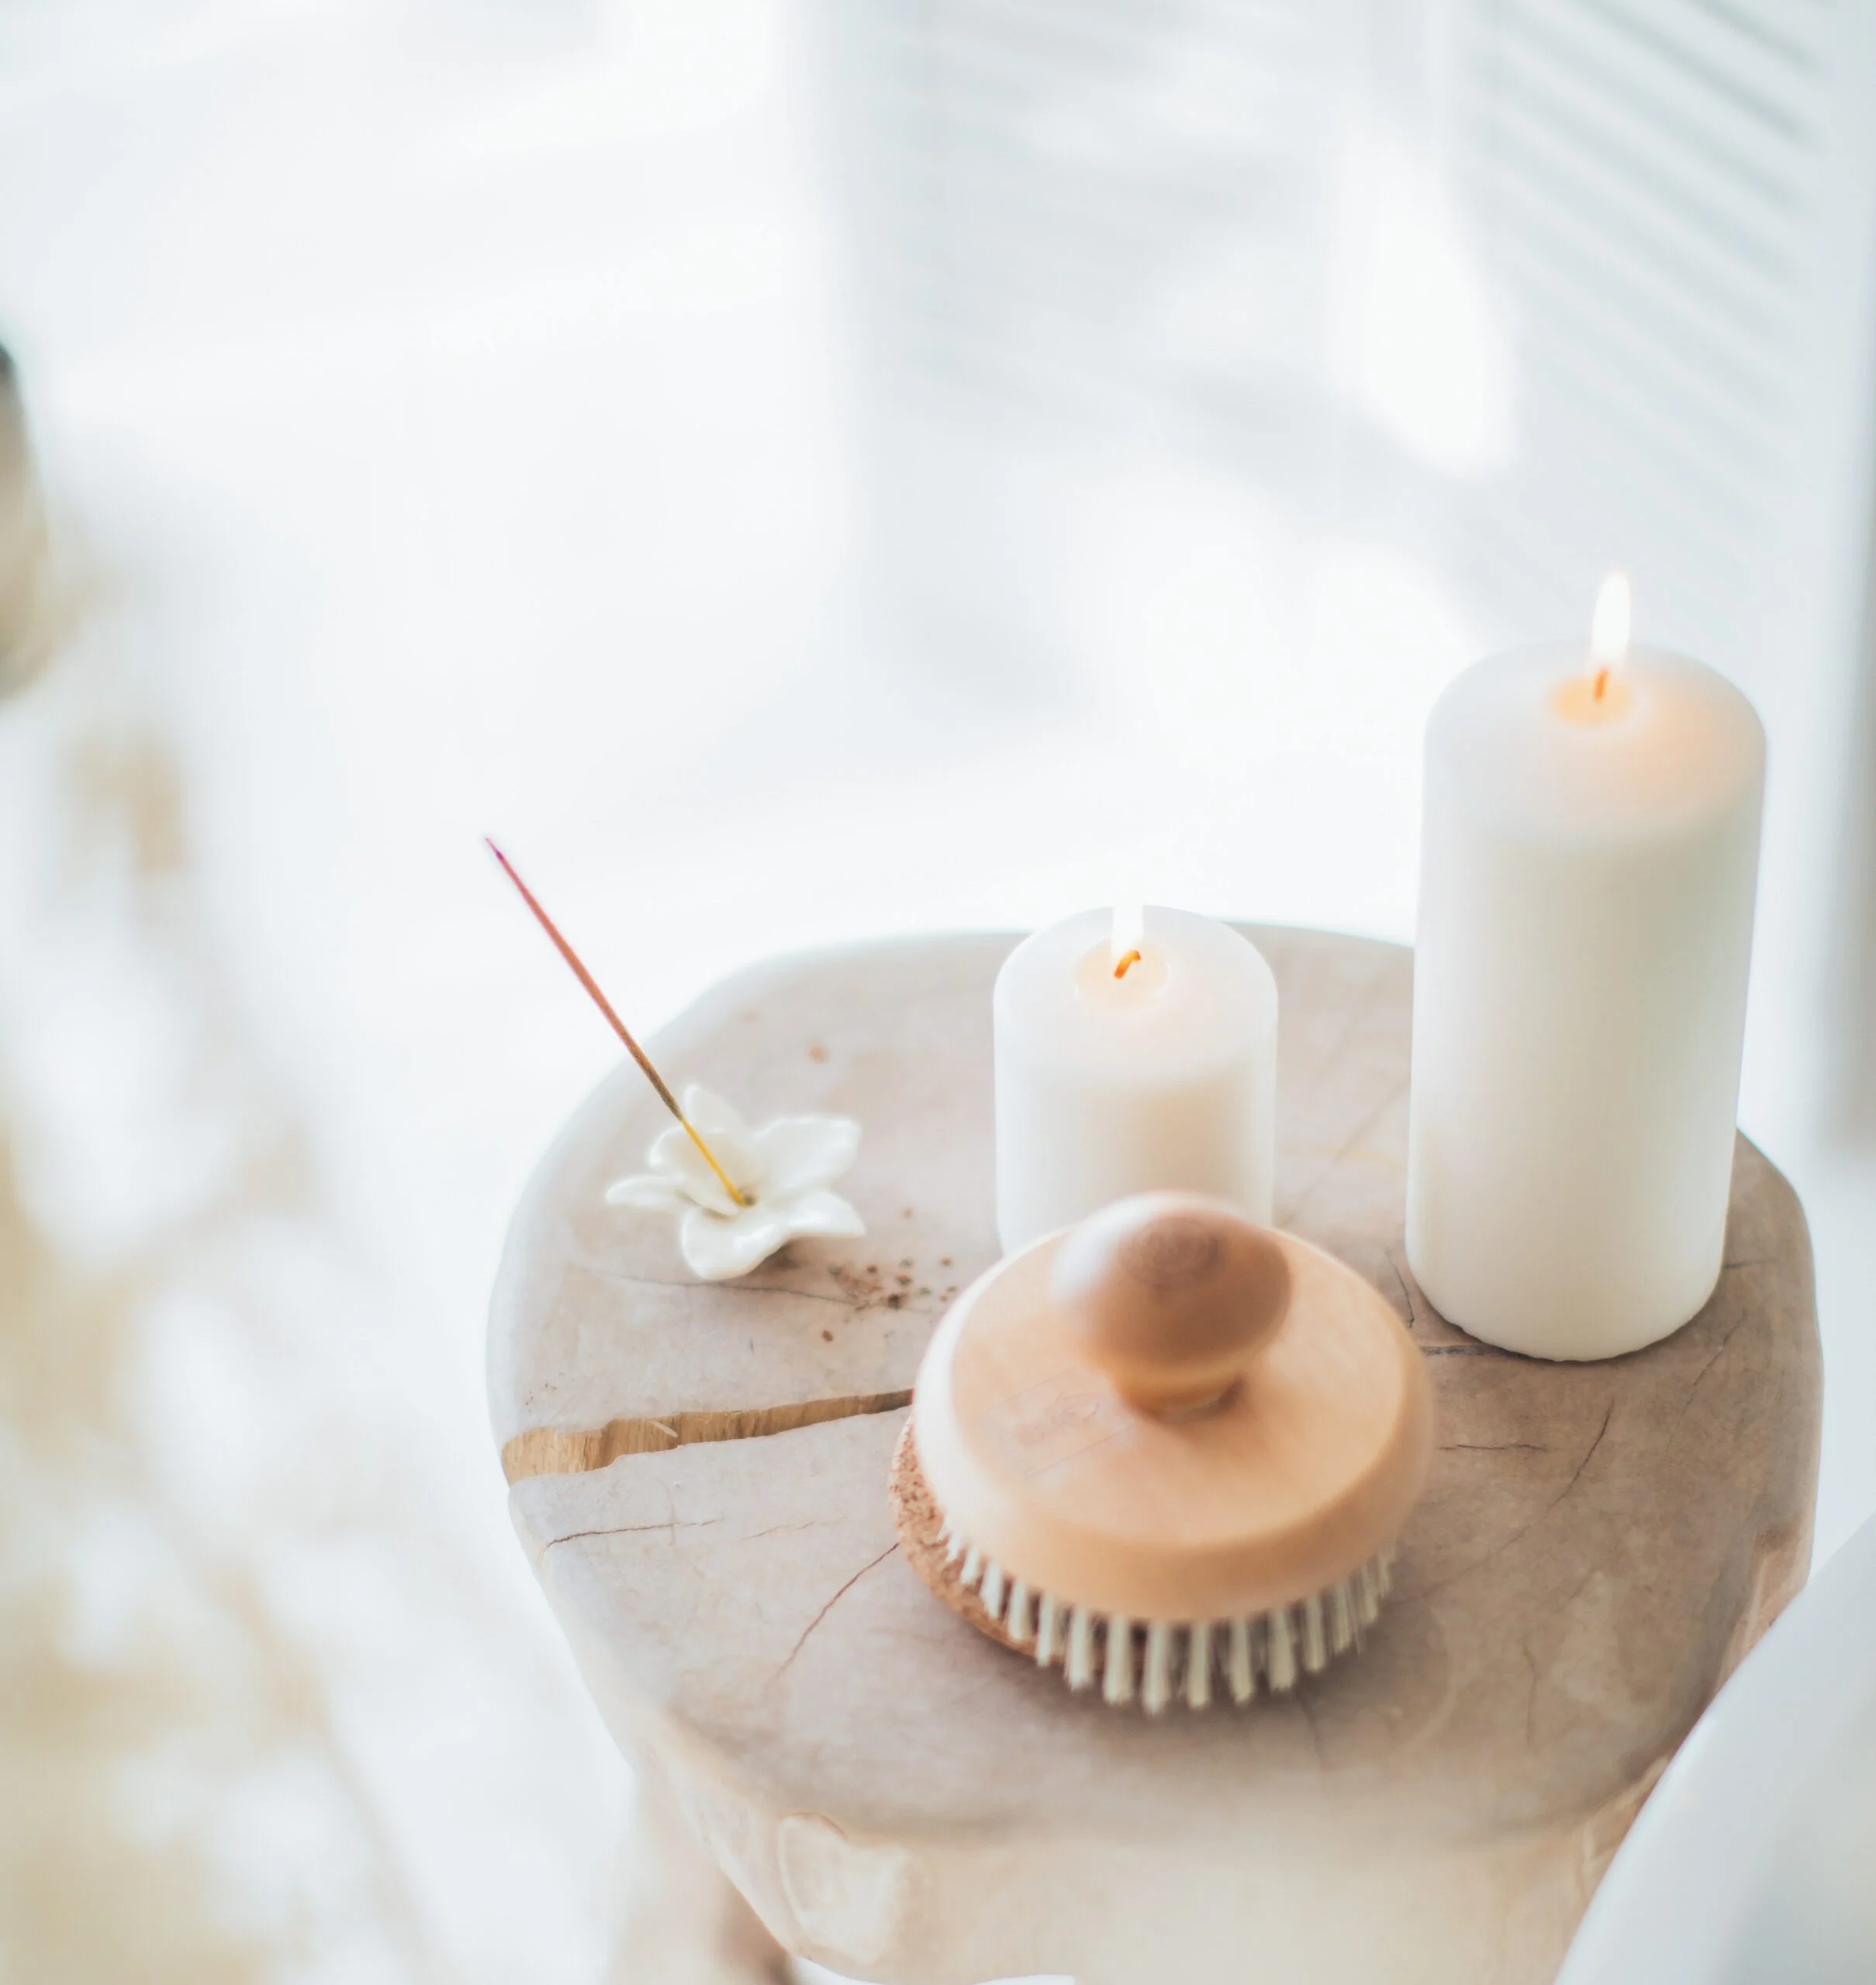 A wooden table with candles and a brush on it.